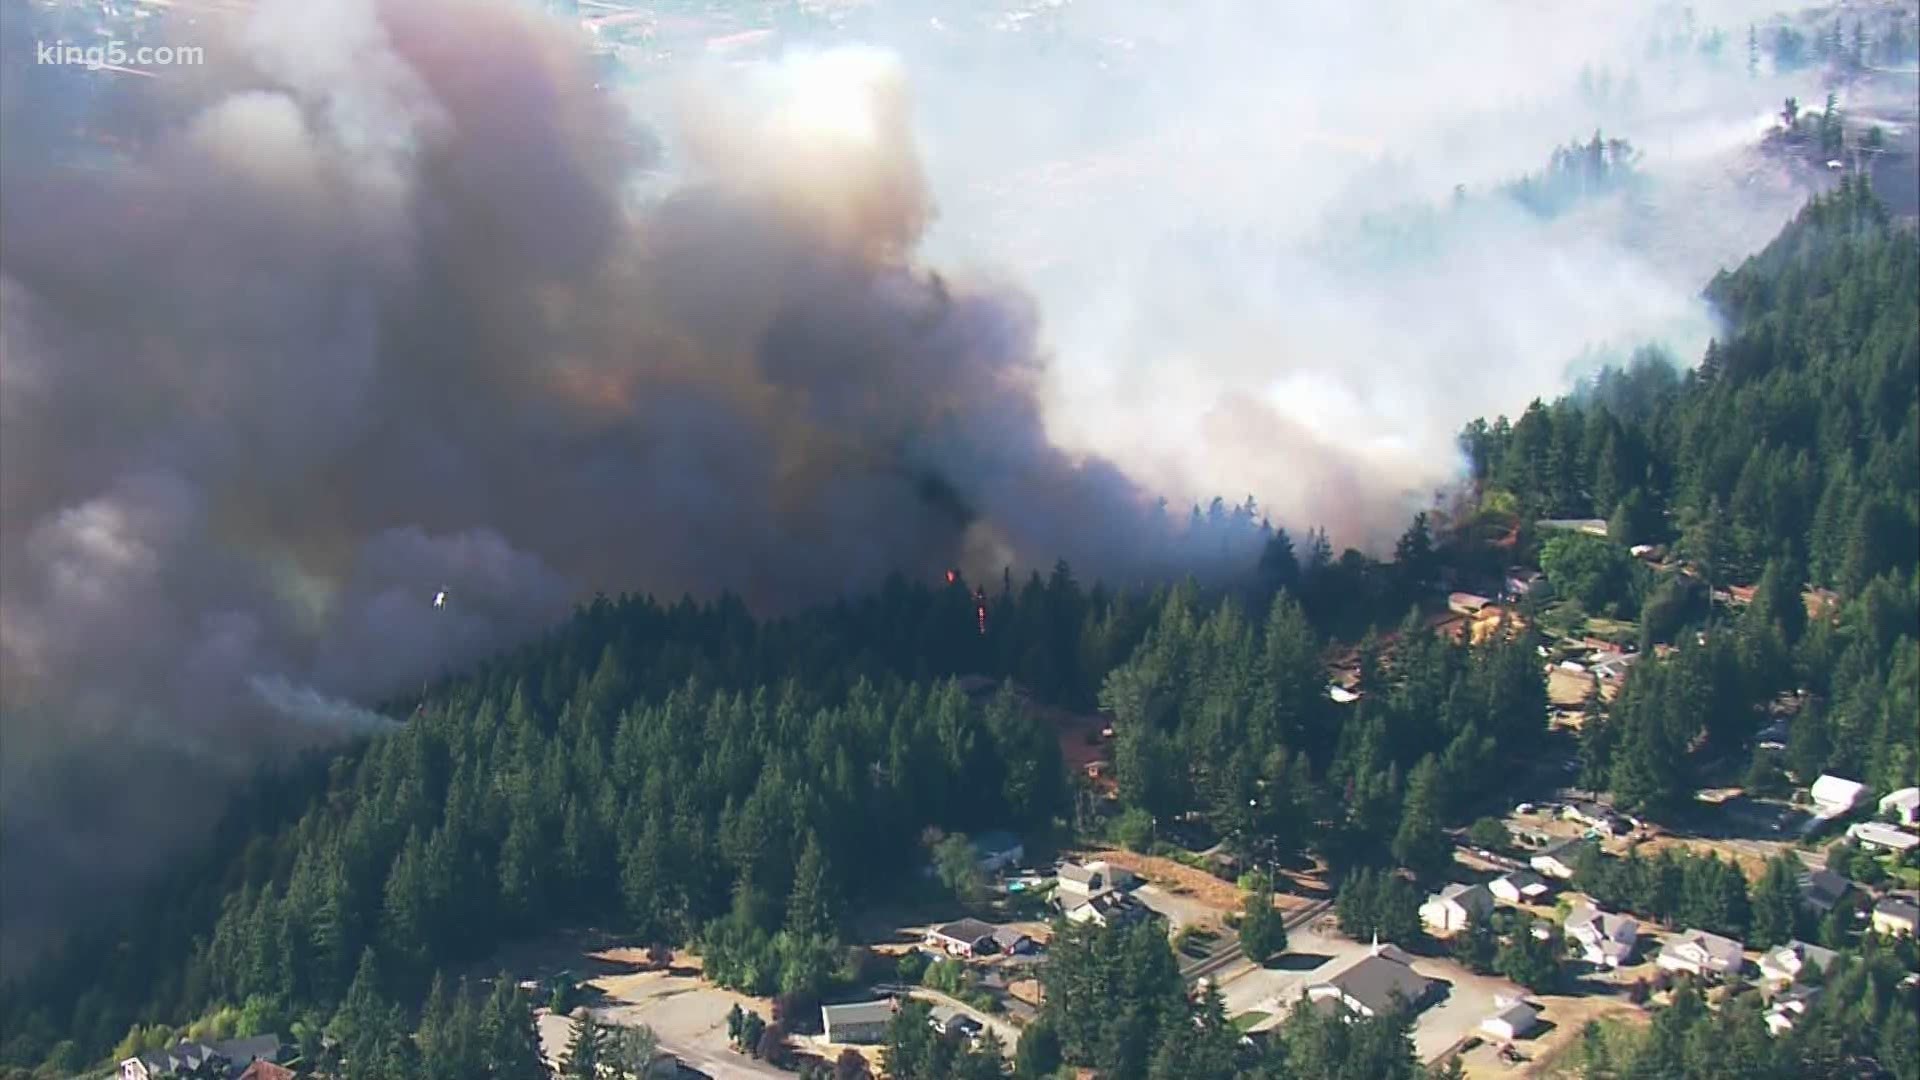 KING 5 coverage of wildfires and smoke affecting all parts of Washington state, Sept. 8, 2020.